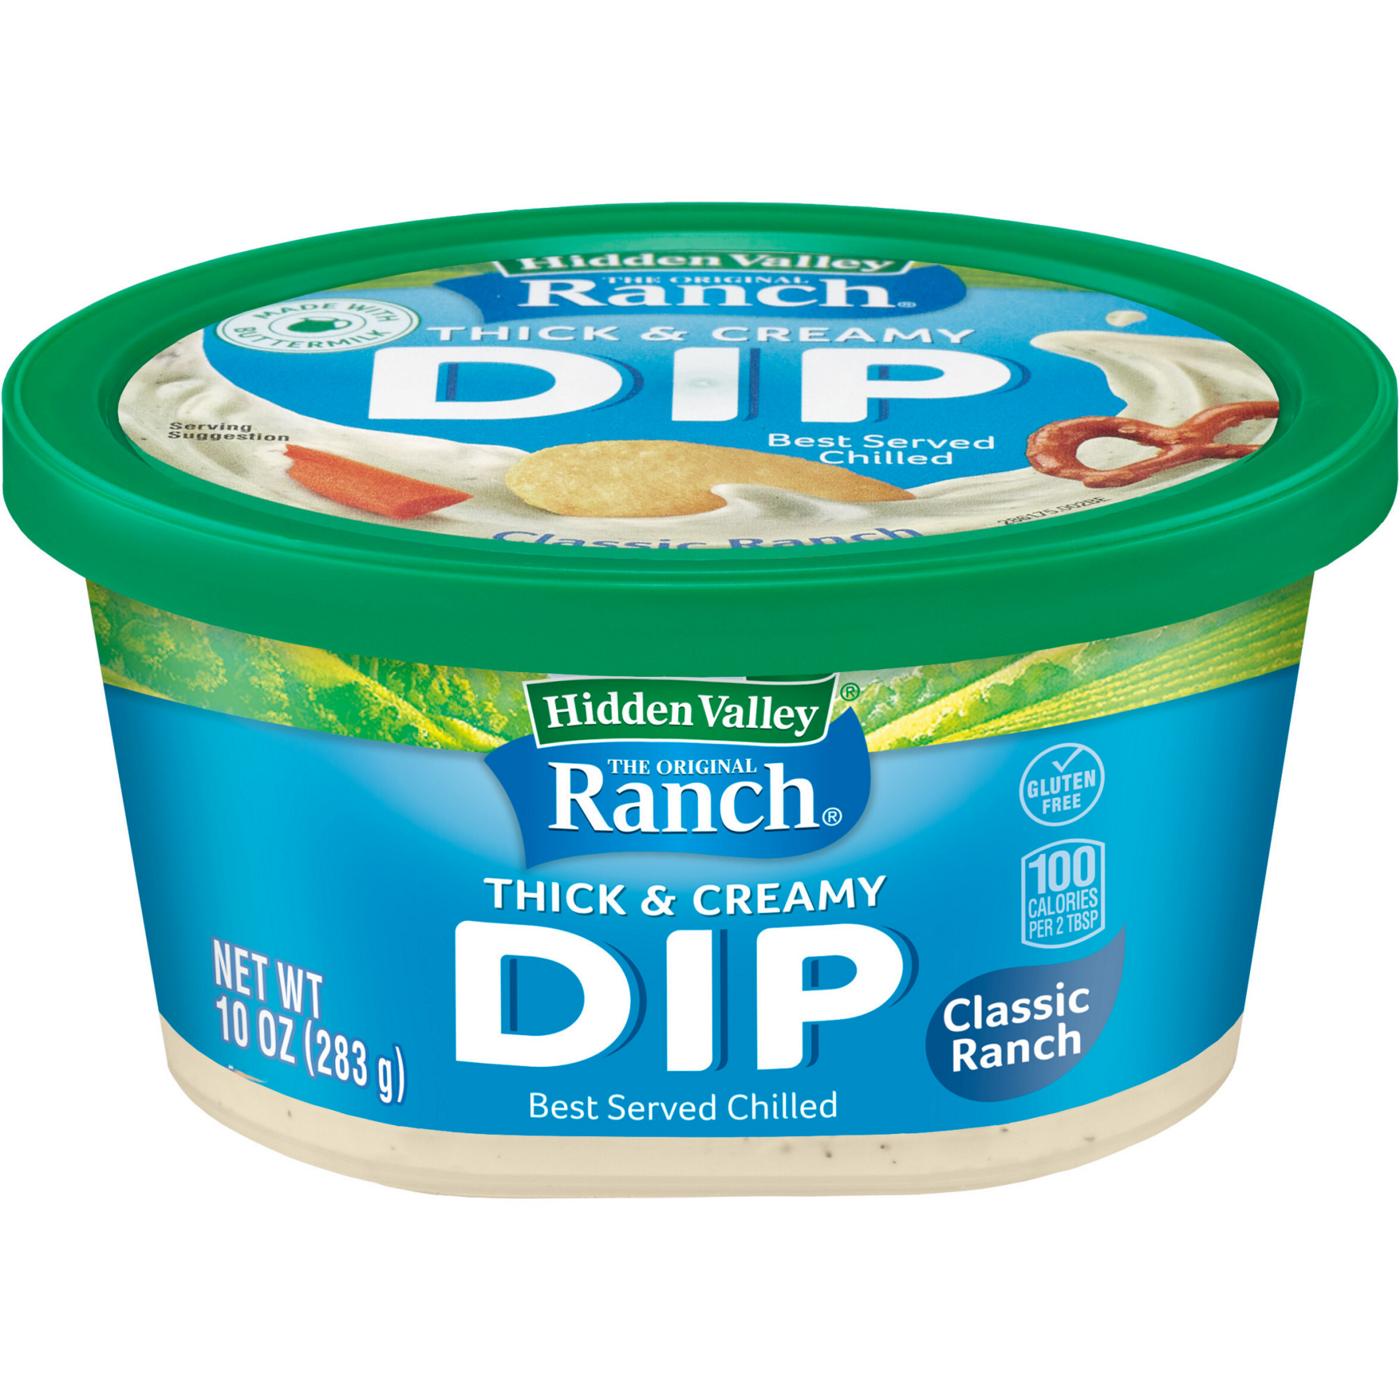 Hidden Valley Thick & Creamy Ready-to-Eat Classic Ranch Dip; image 1 of 8